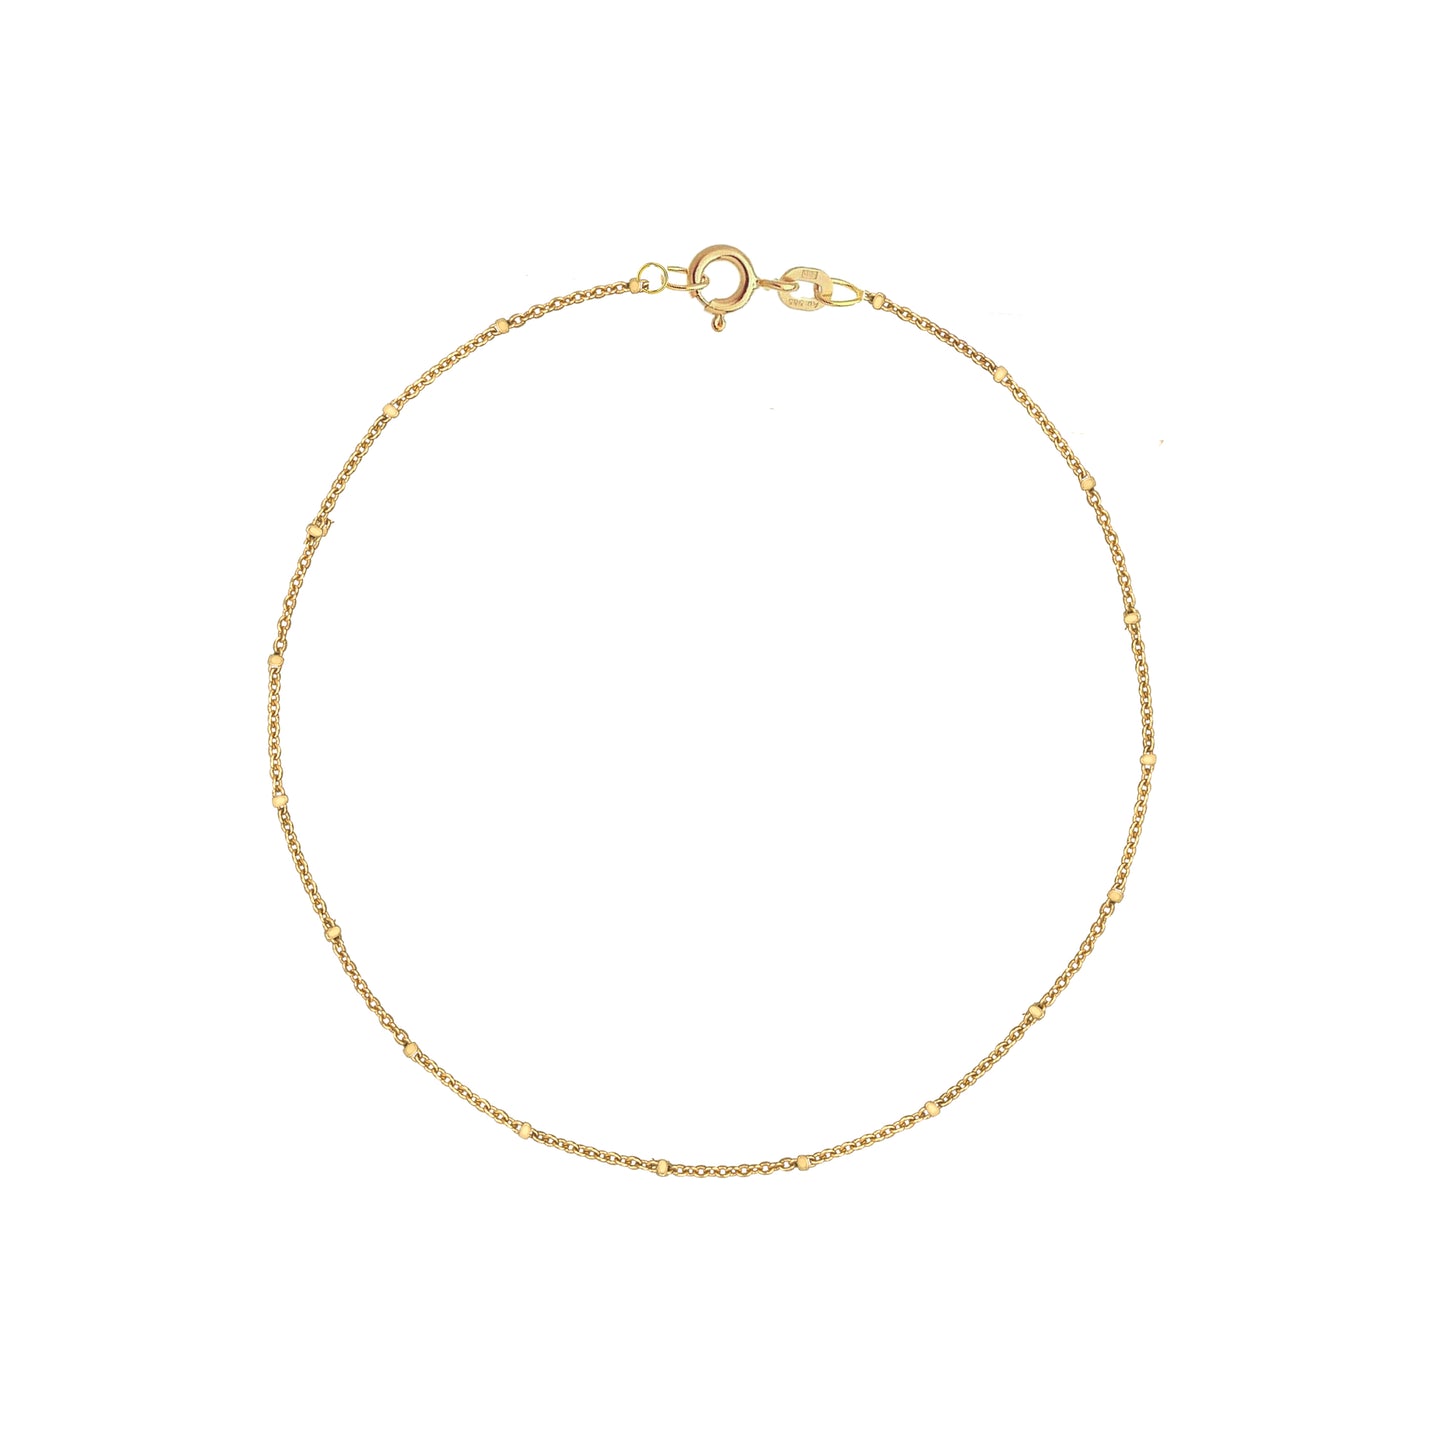 Satellite Chain Bracelet in Solid 9k Yellow Gold